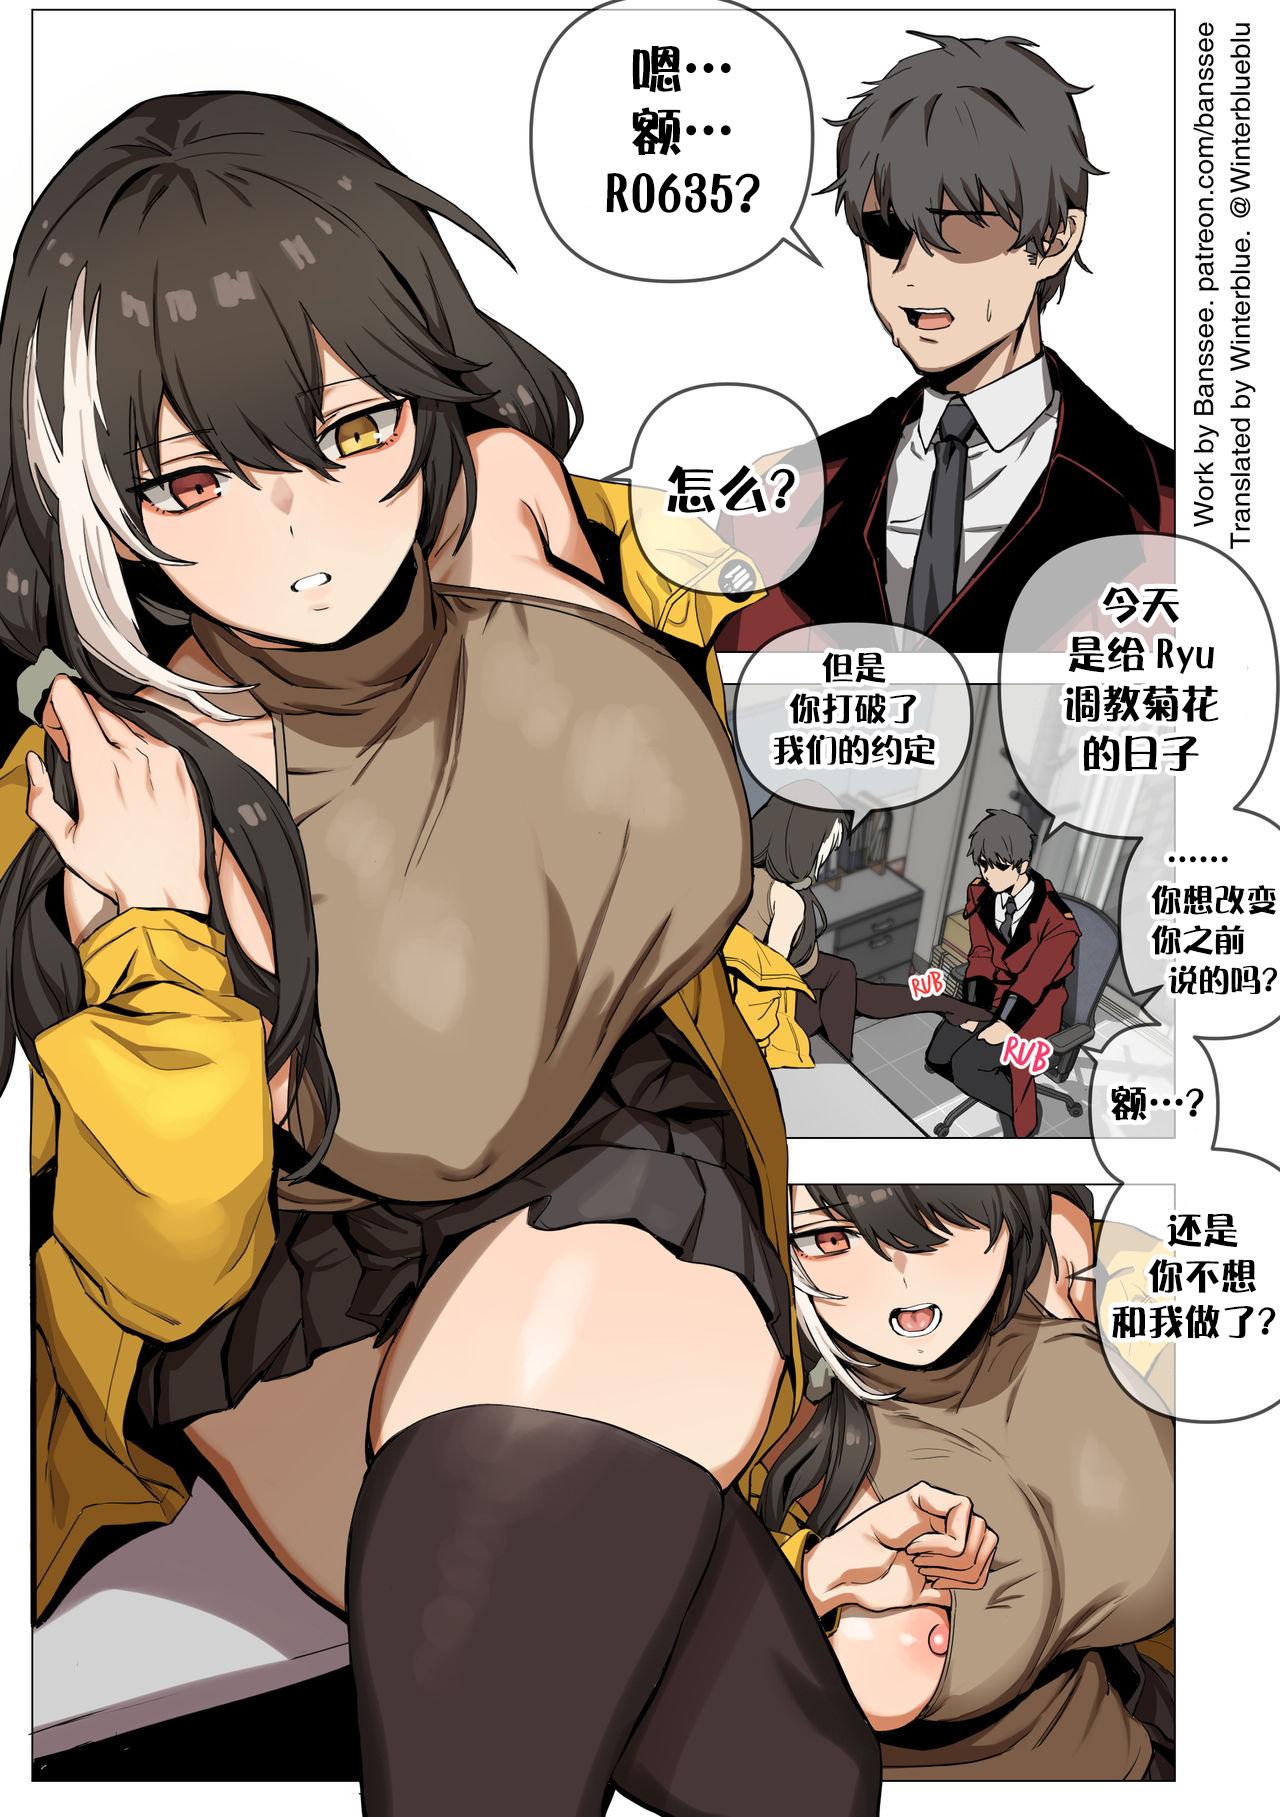 Bokep RO635 - Girls frontline Big breasts - Picture 1